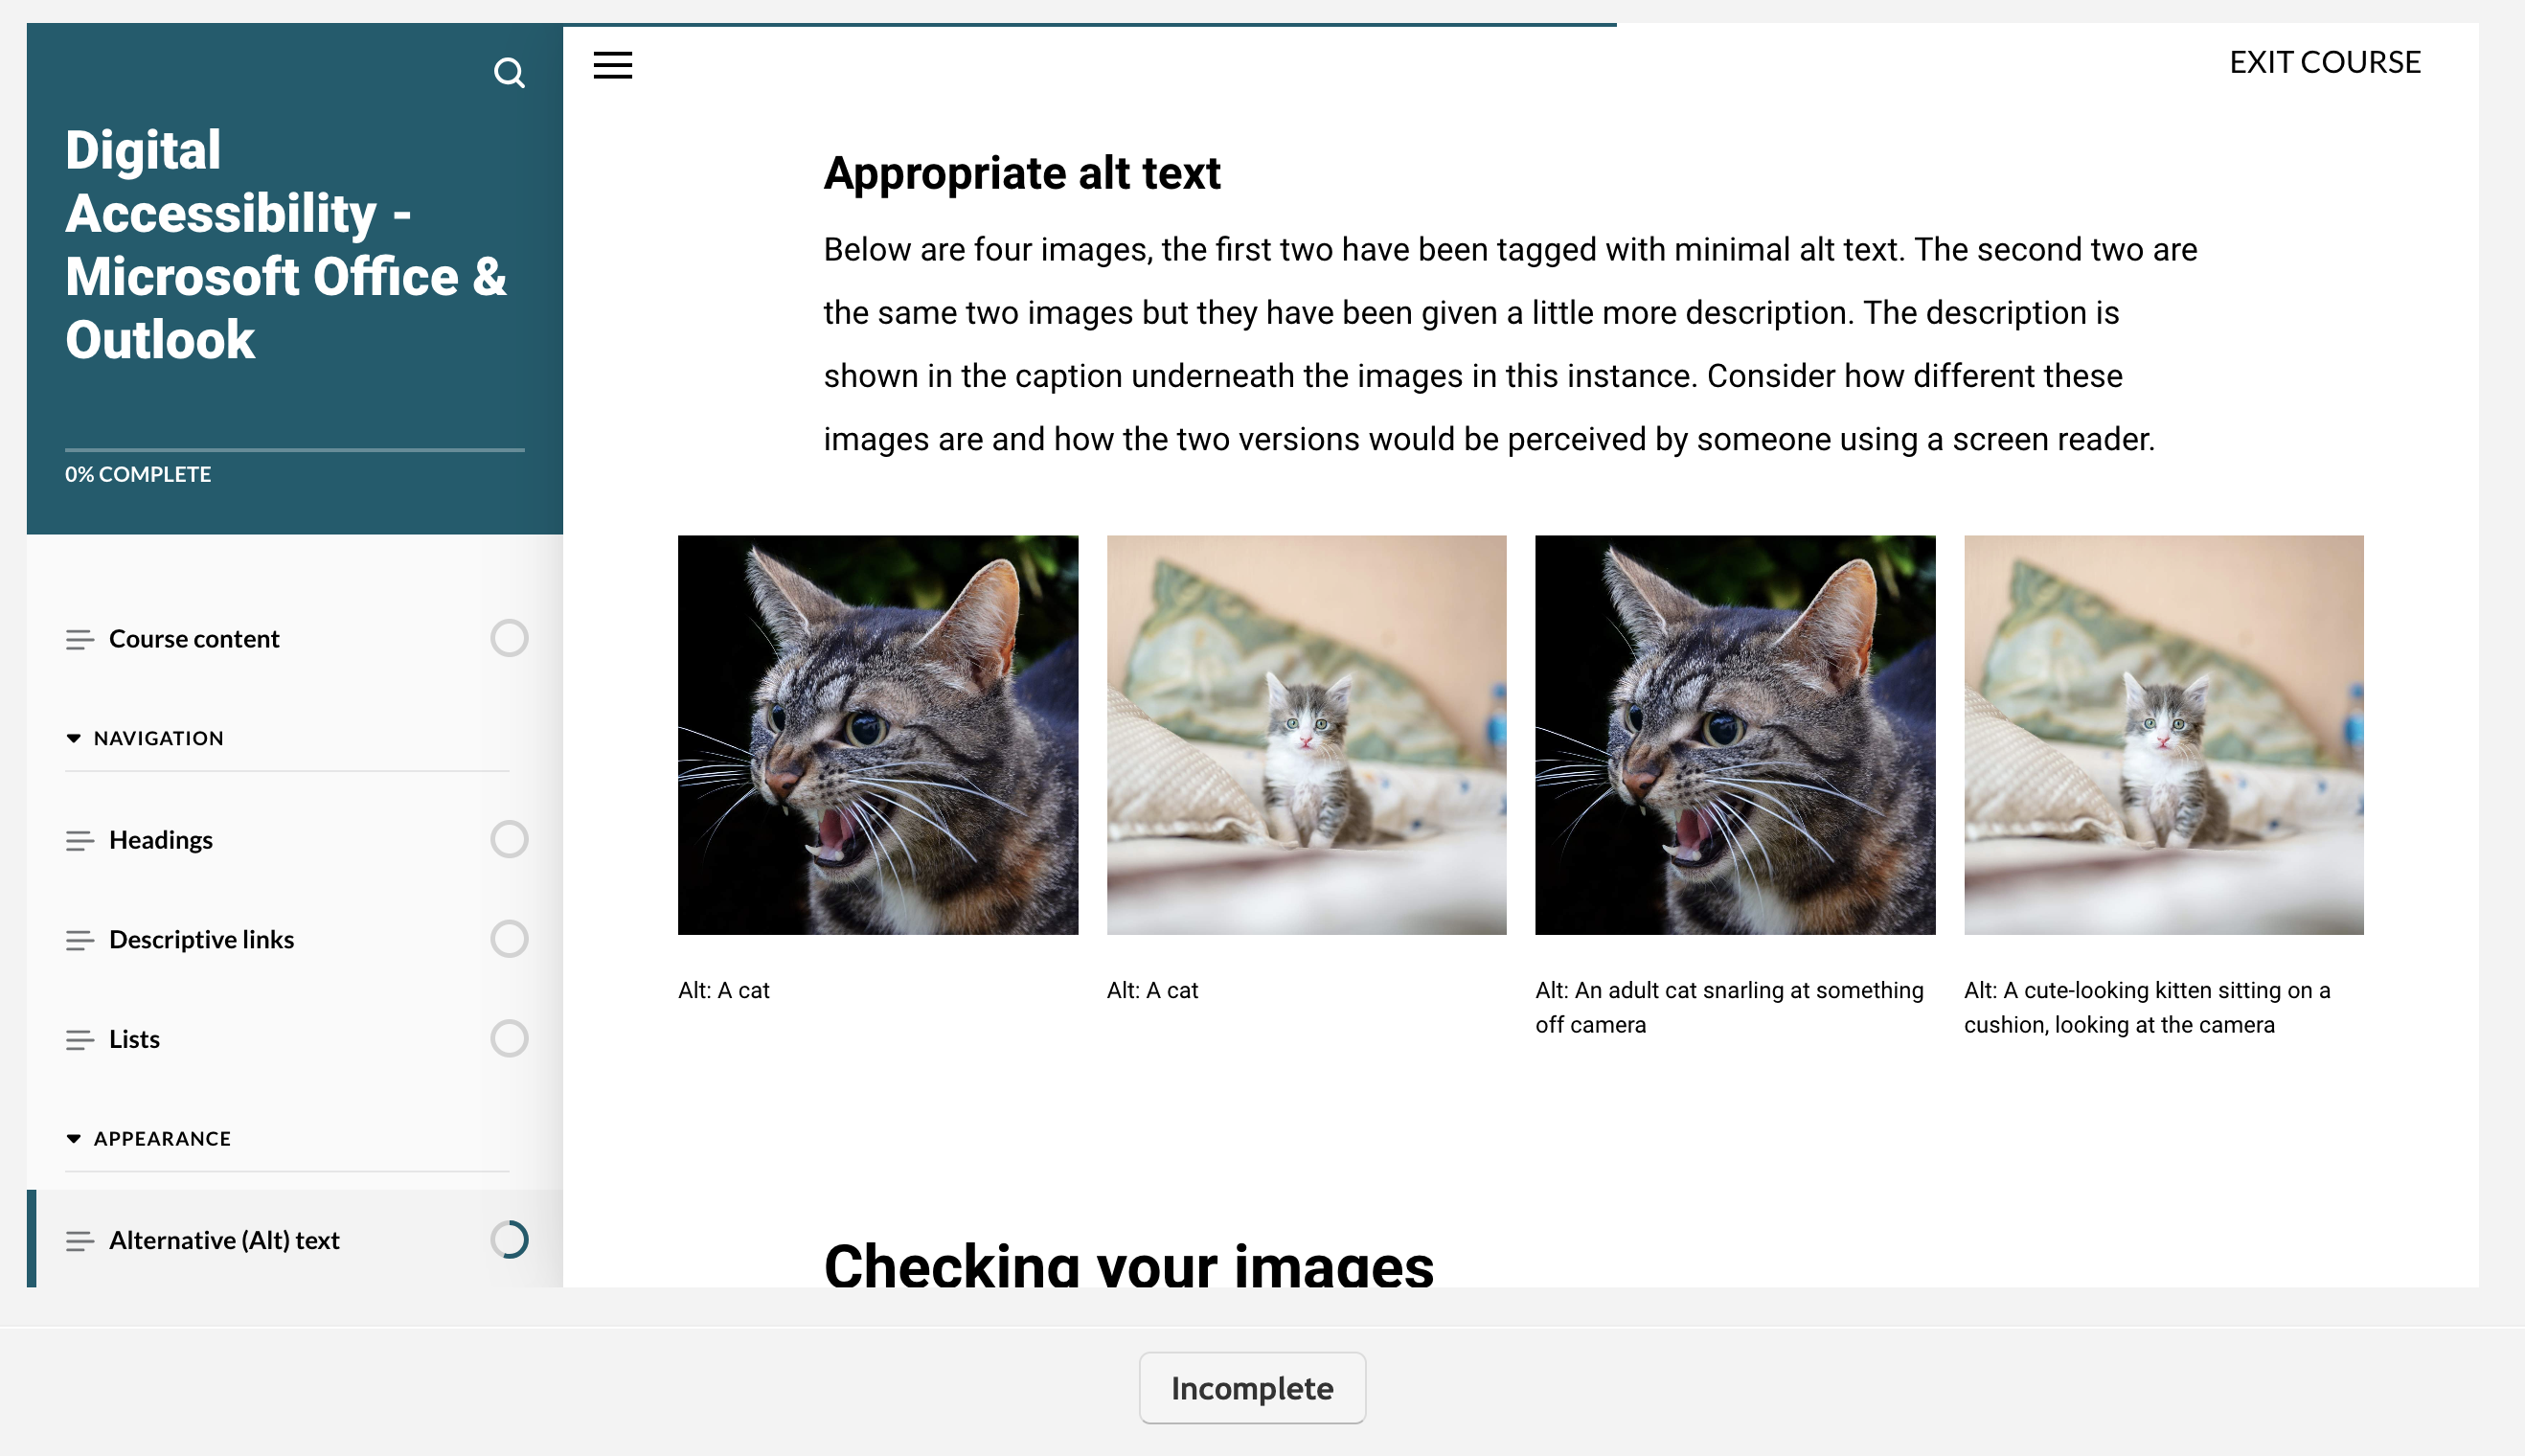 Screenshot from Office 365 eLearning online module showing images of cats to demonstrate the importance of appropriate alt text. 4 images are featured - two of an adult cat snarling at something off camera, and two of a cute kitten sitting on a cushion. But with different alt text applied to the first two separate images - they both say 'a cat' whereas the other images are more descriptive as mentioned. The Left hand navigation of the webpage shows 'Digital Accessibility - Microsoft Office and Outlook' and then 'Course content, Headings, Descriptive links, Lists, Appearance, and Alt text' as the navigation options.